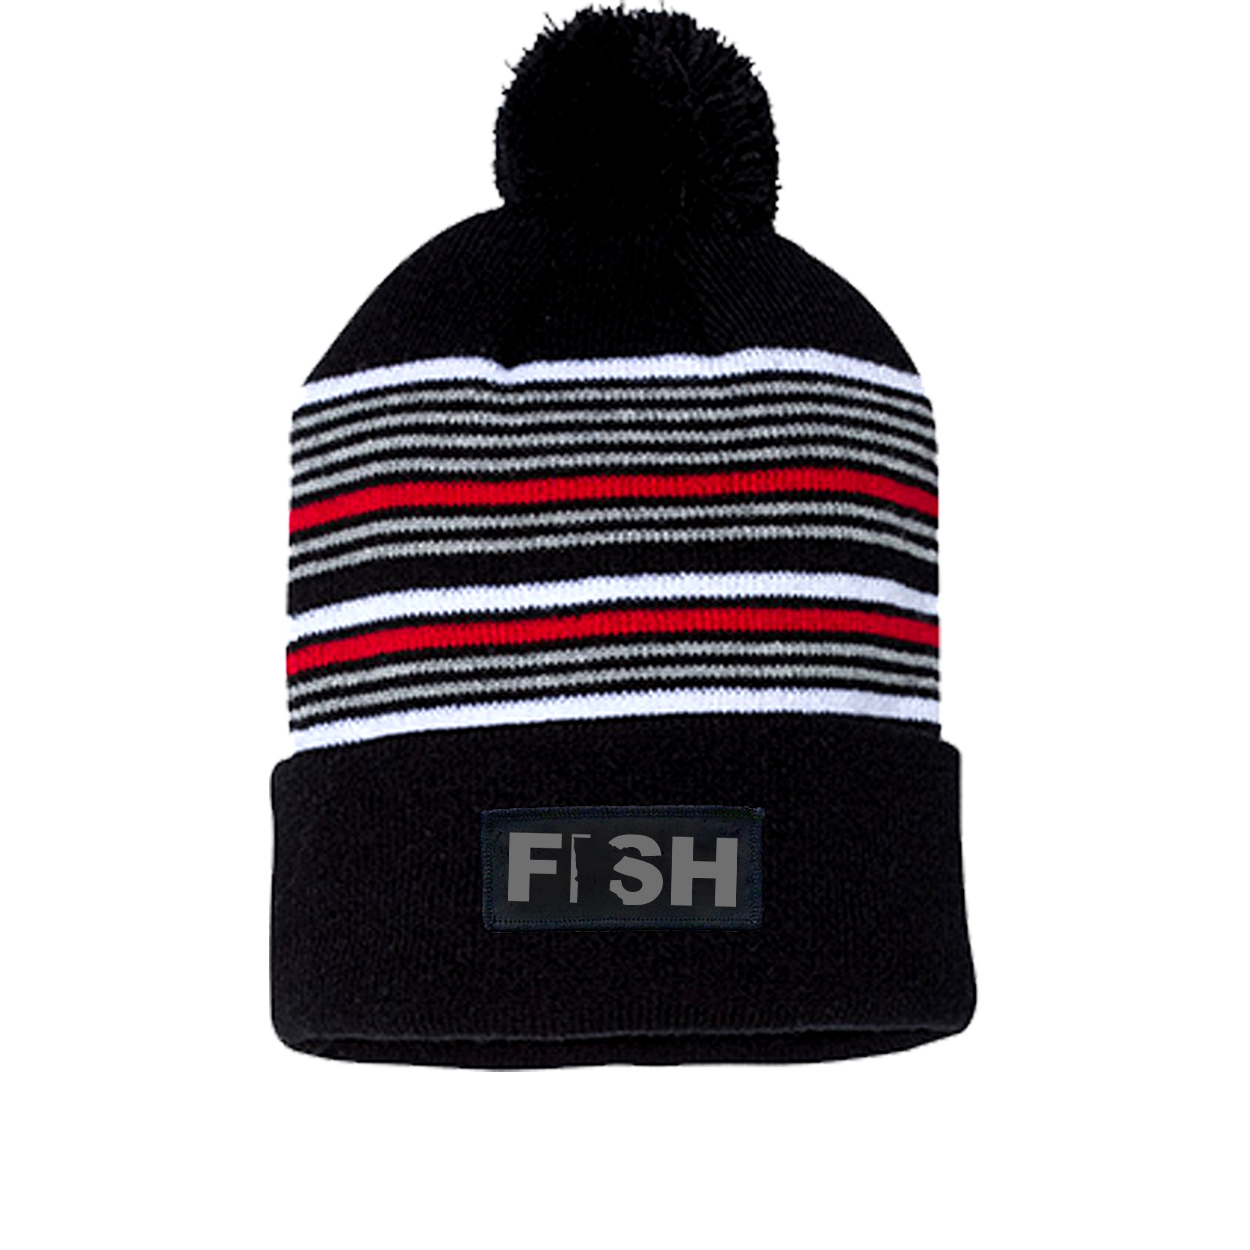 Fish Minnesota Night Out Woven Patch Roll Up Pom Knit Beanie Black/ White/ Grey/ Red Beanie (Gray Logo)